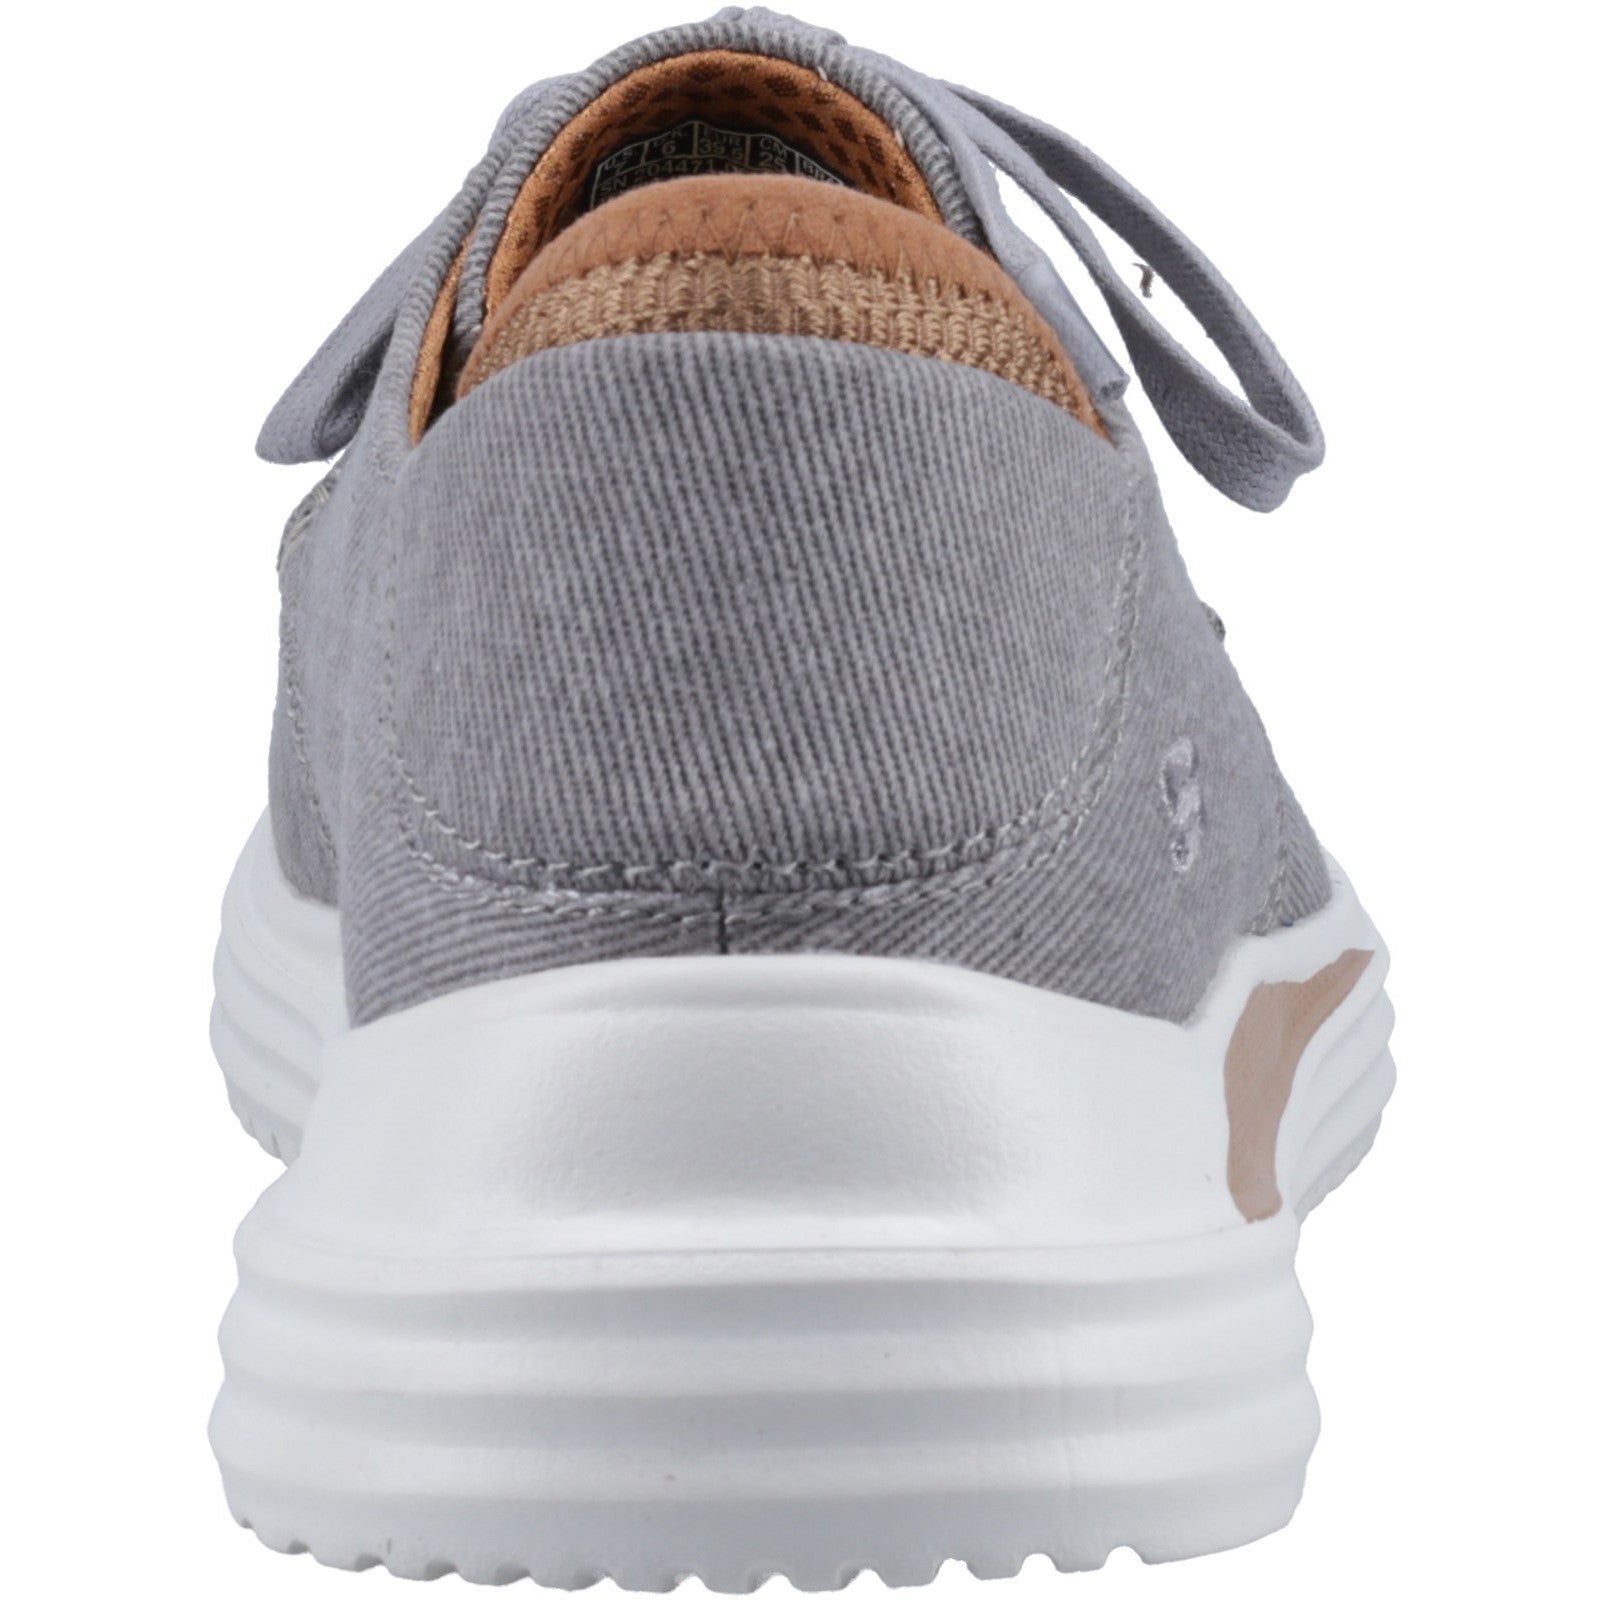 Skechers Mens Proven Forenzo Casual Shoe - Taupe